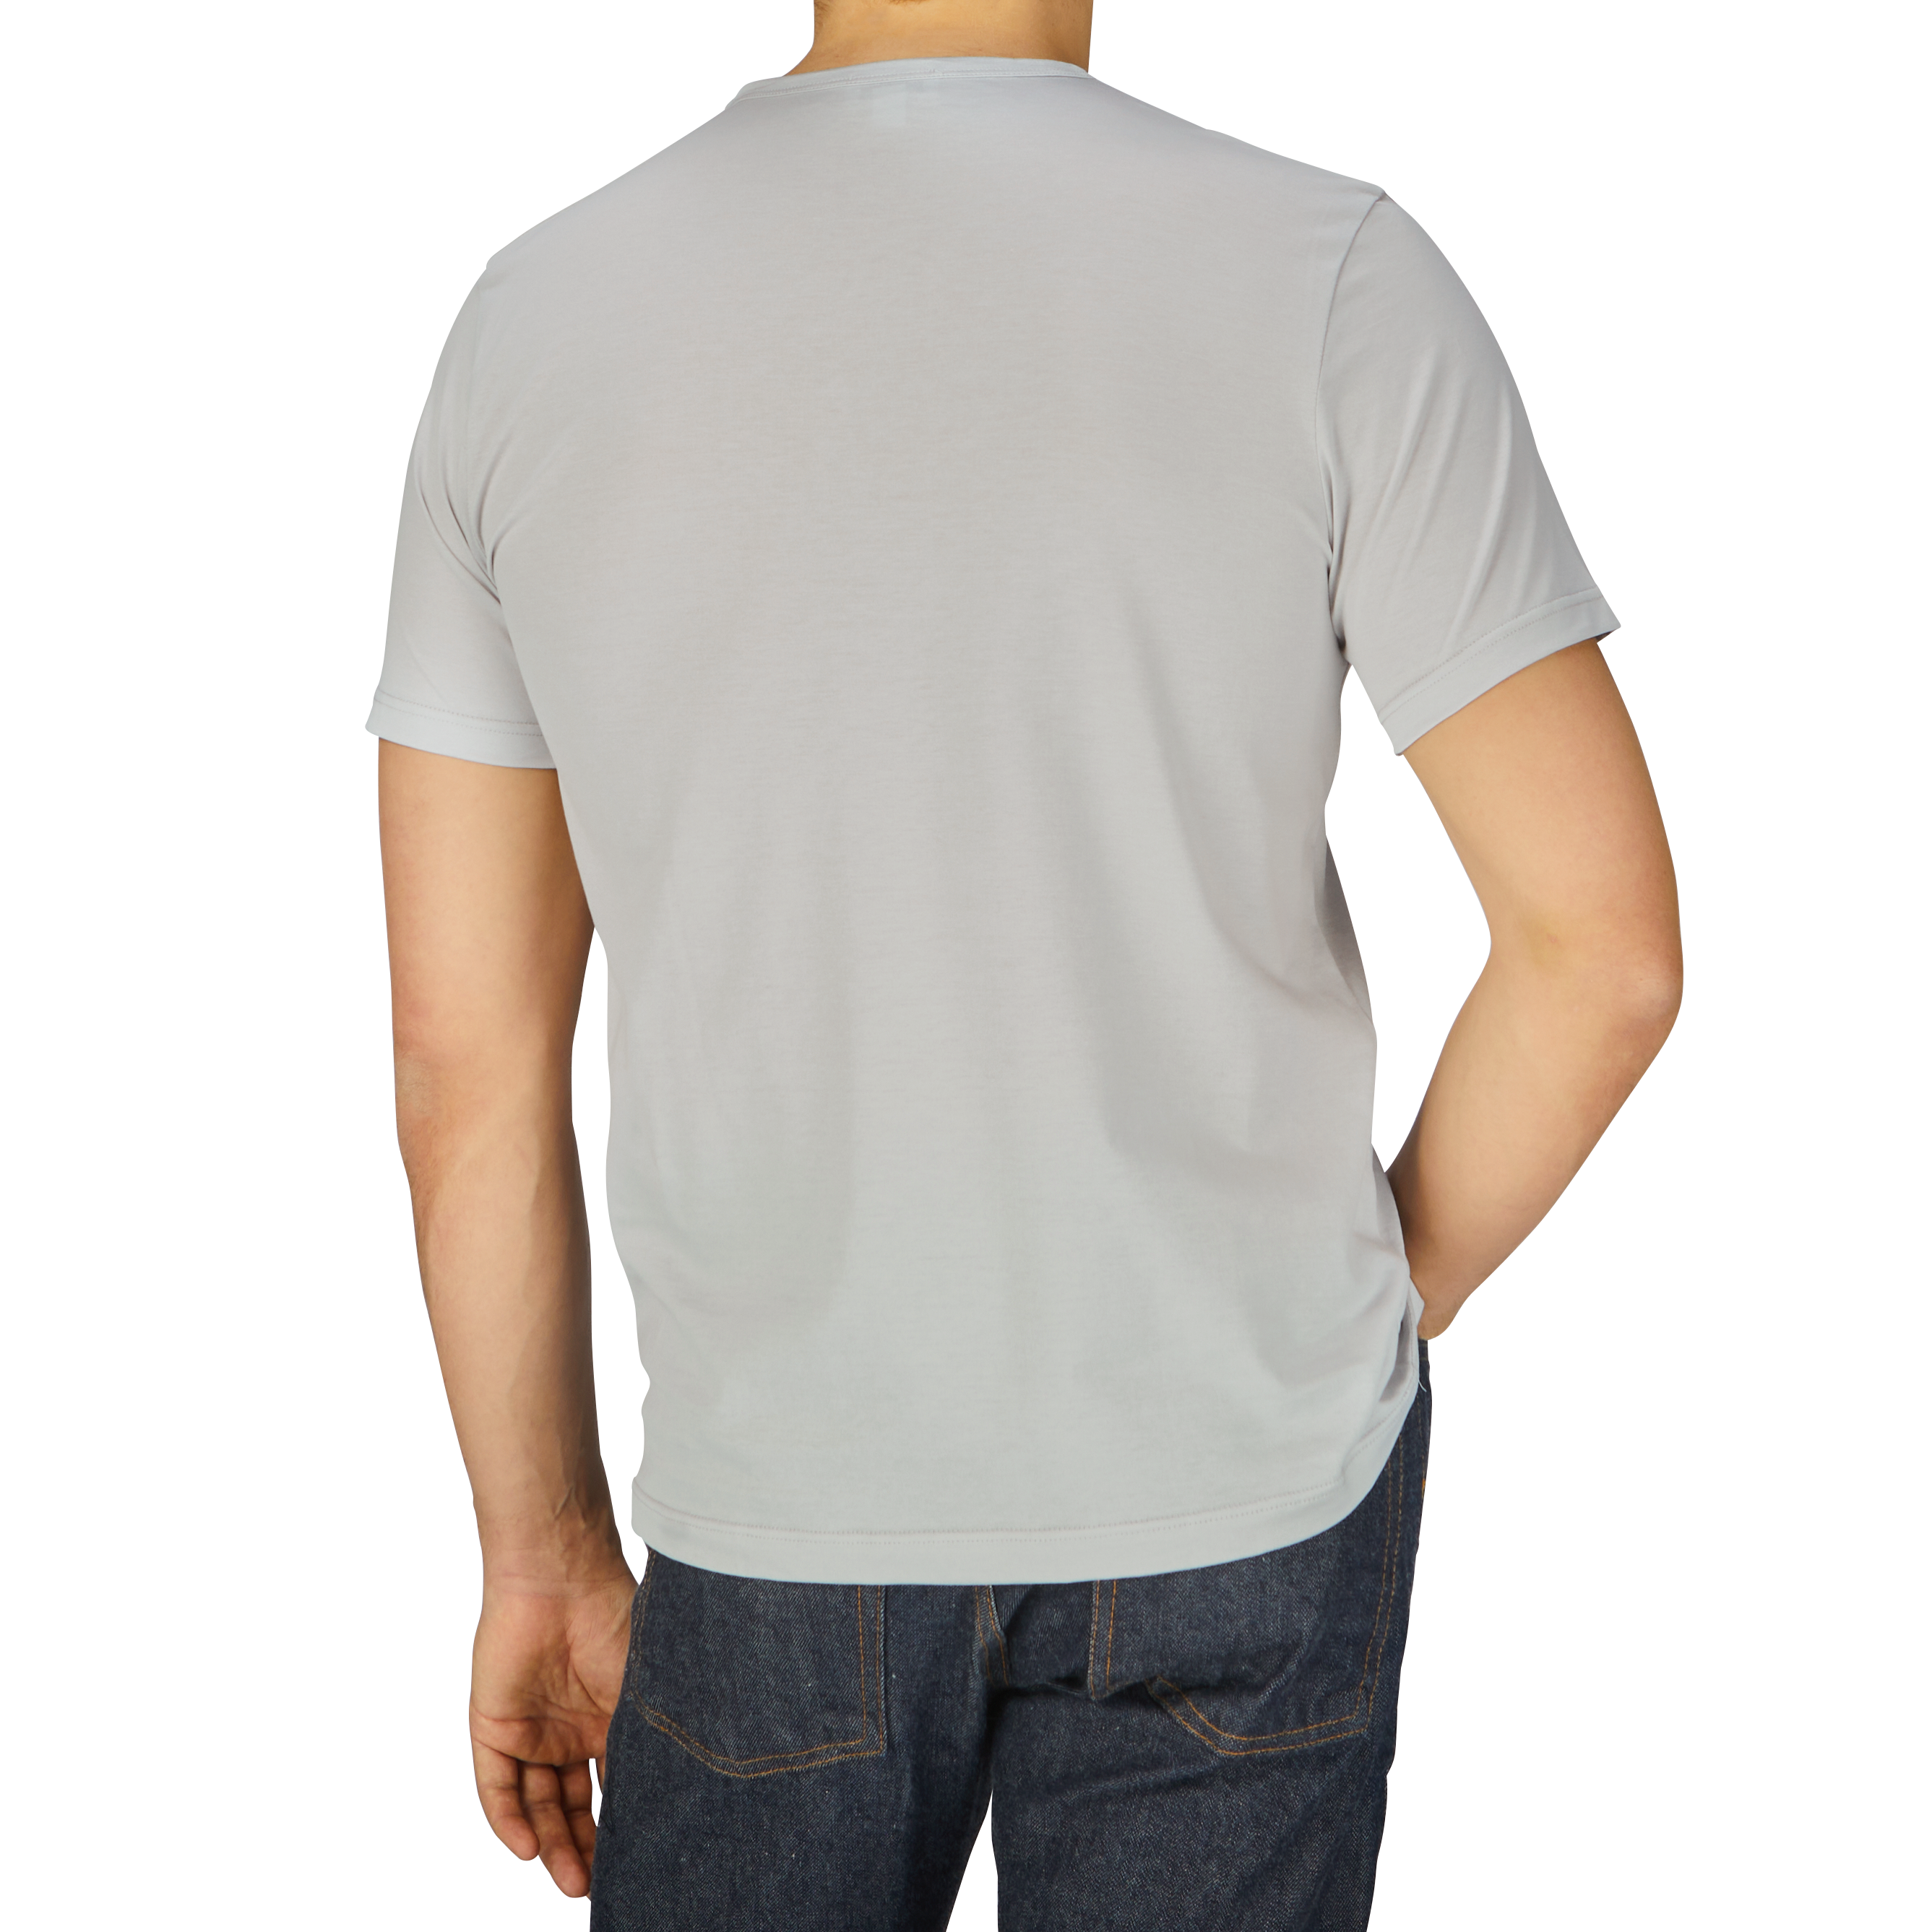 The back view of a man in a Sunspel Smoke Grey Classic Cotton T-Shirt.